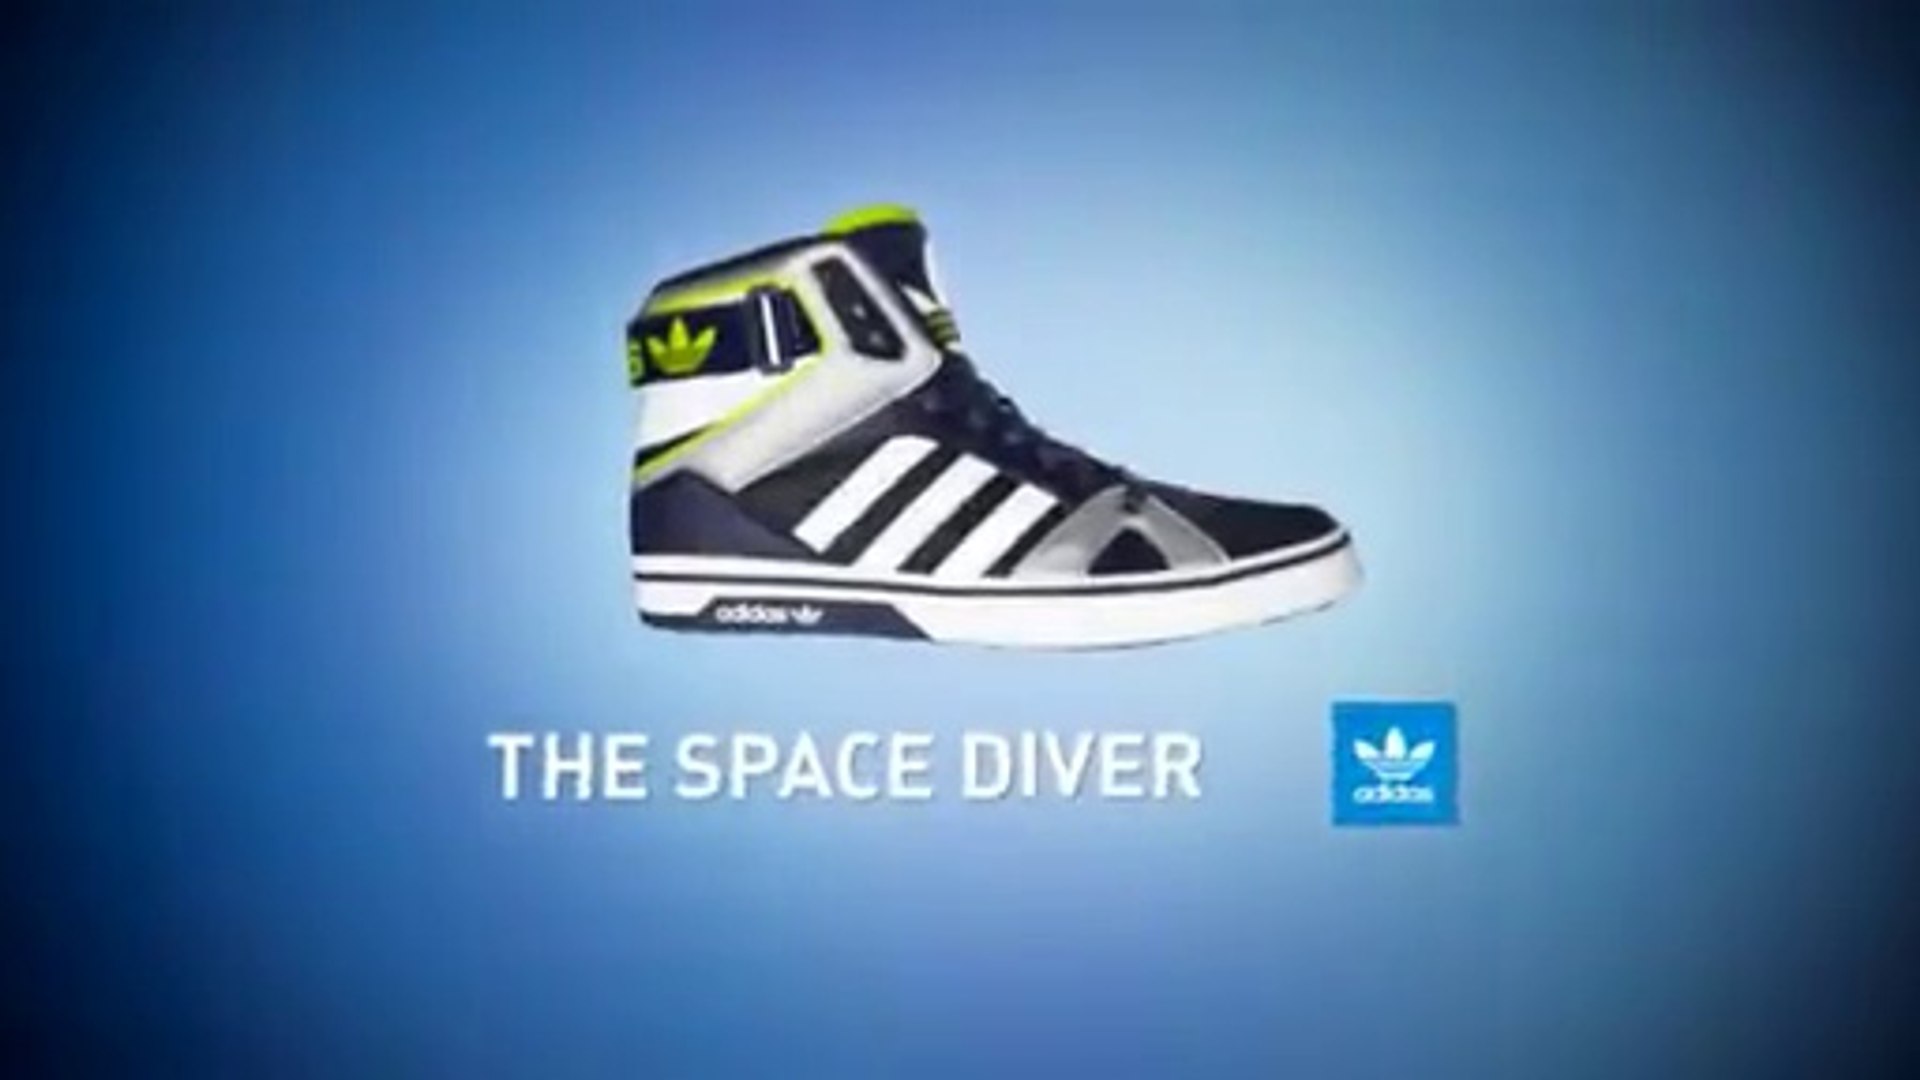 Foot Locker Presents Adidas Space Diver "Let's Roll" starring Snoop Lion -  Vidéo Dailymotion